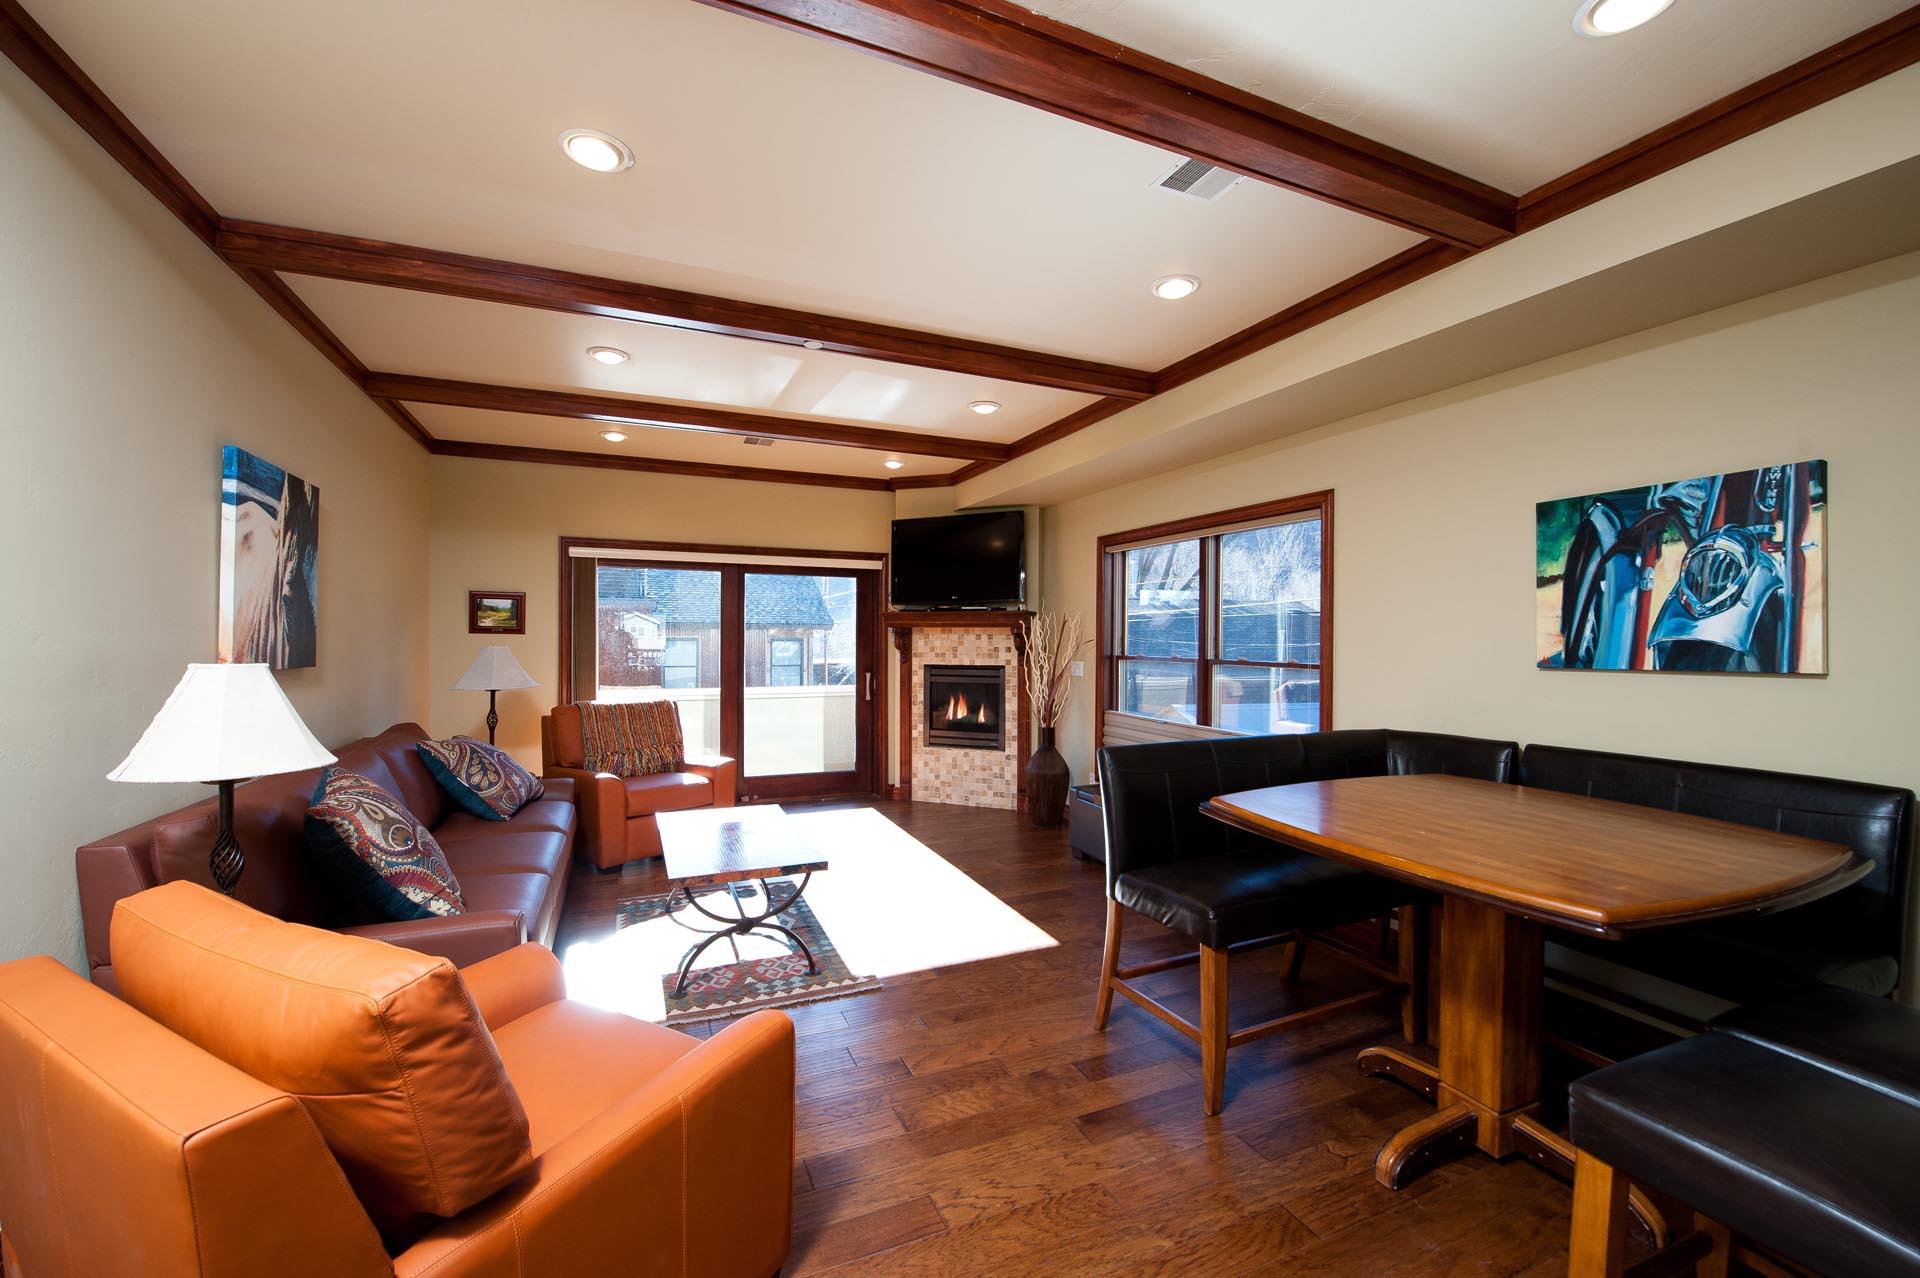 Downtown Durango, CO vacation rental condo. Living room with Fireplace and TV